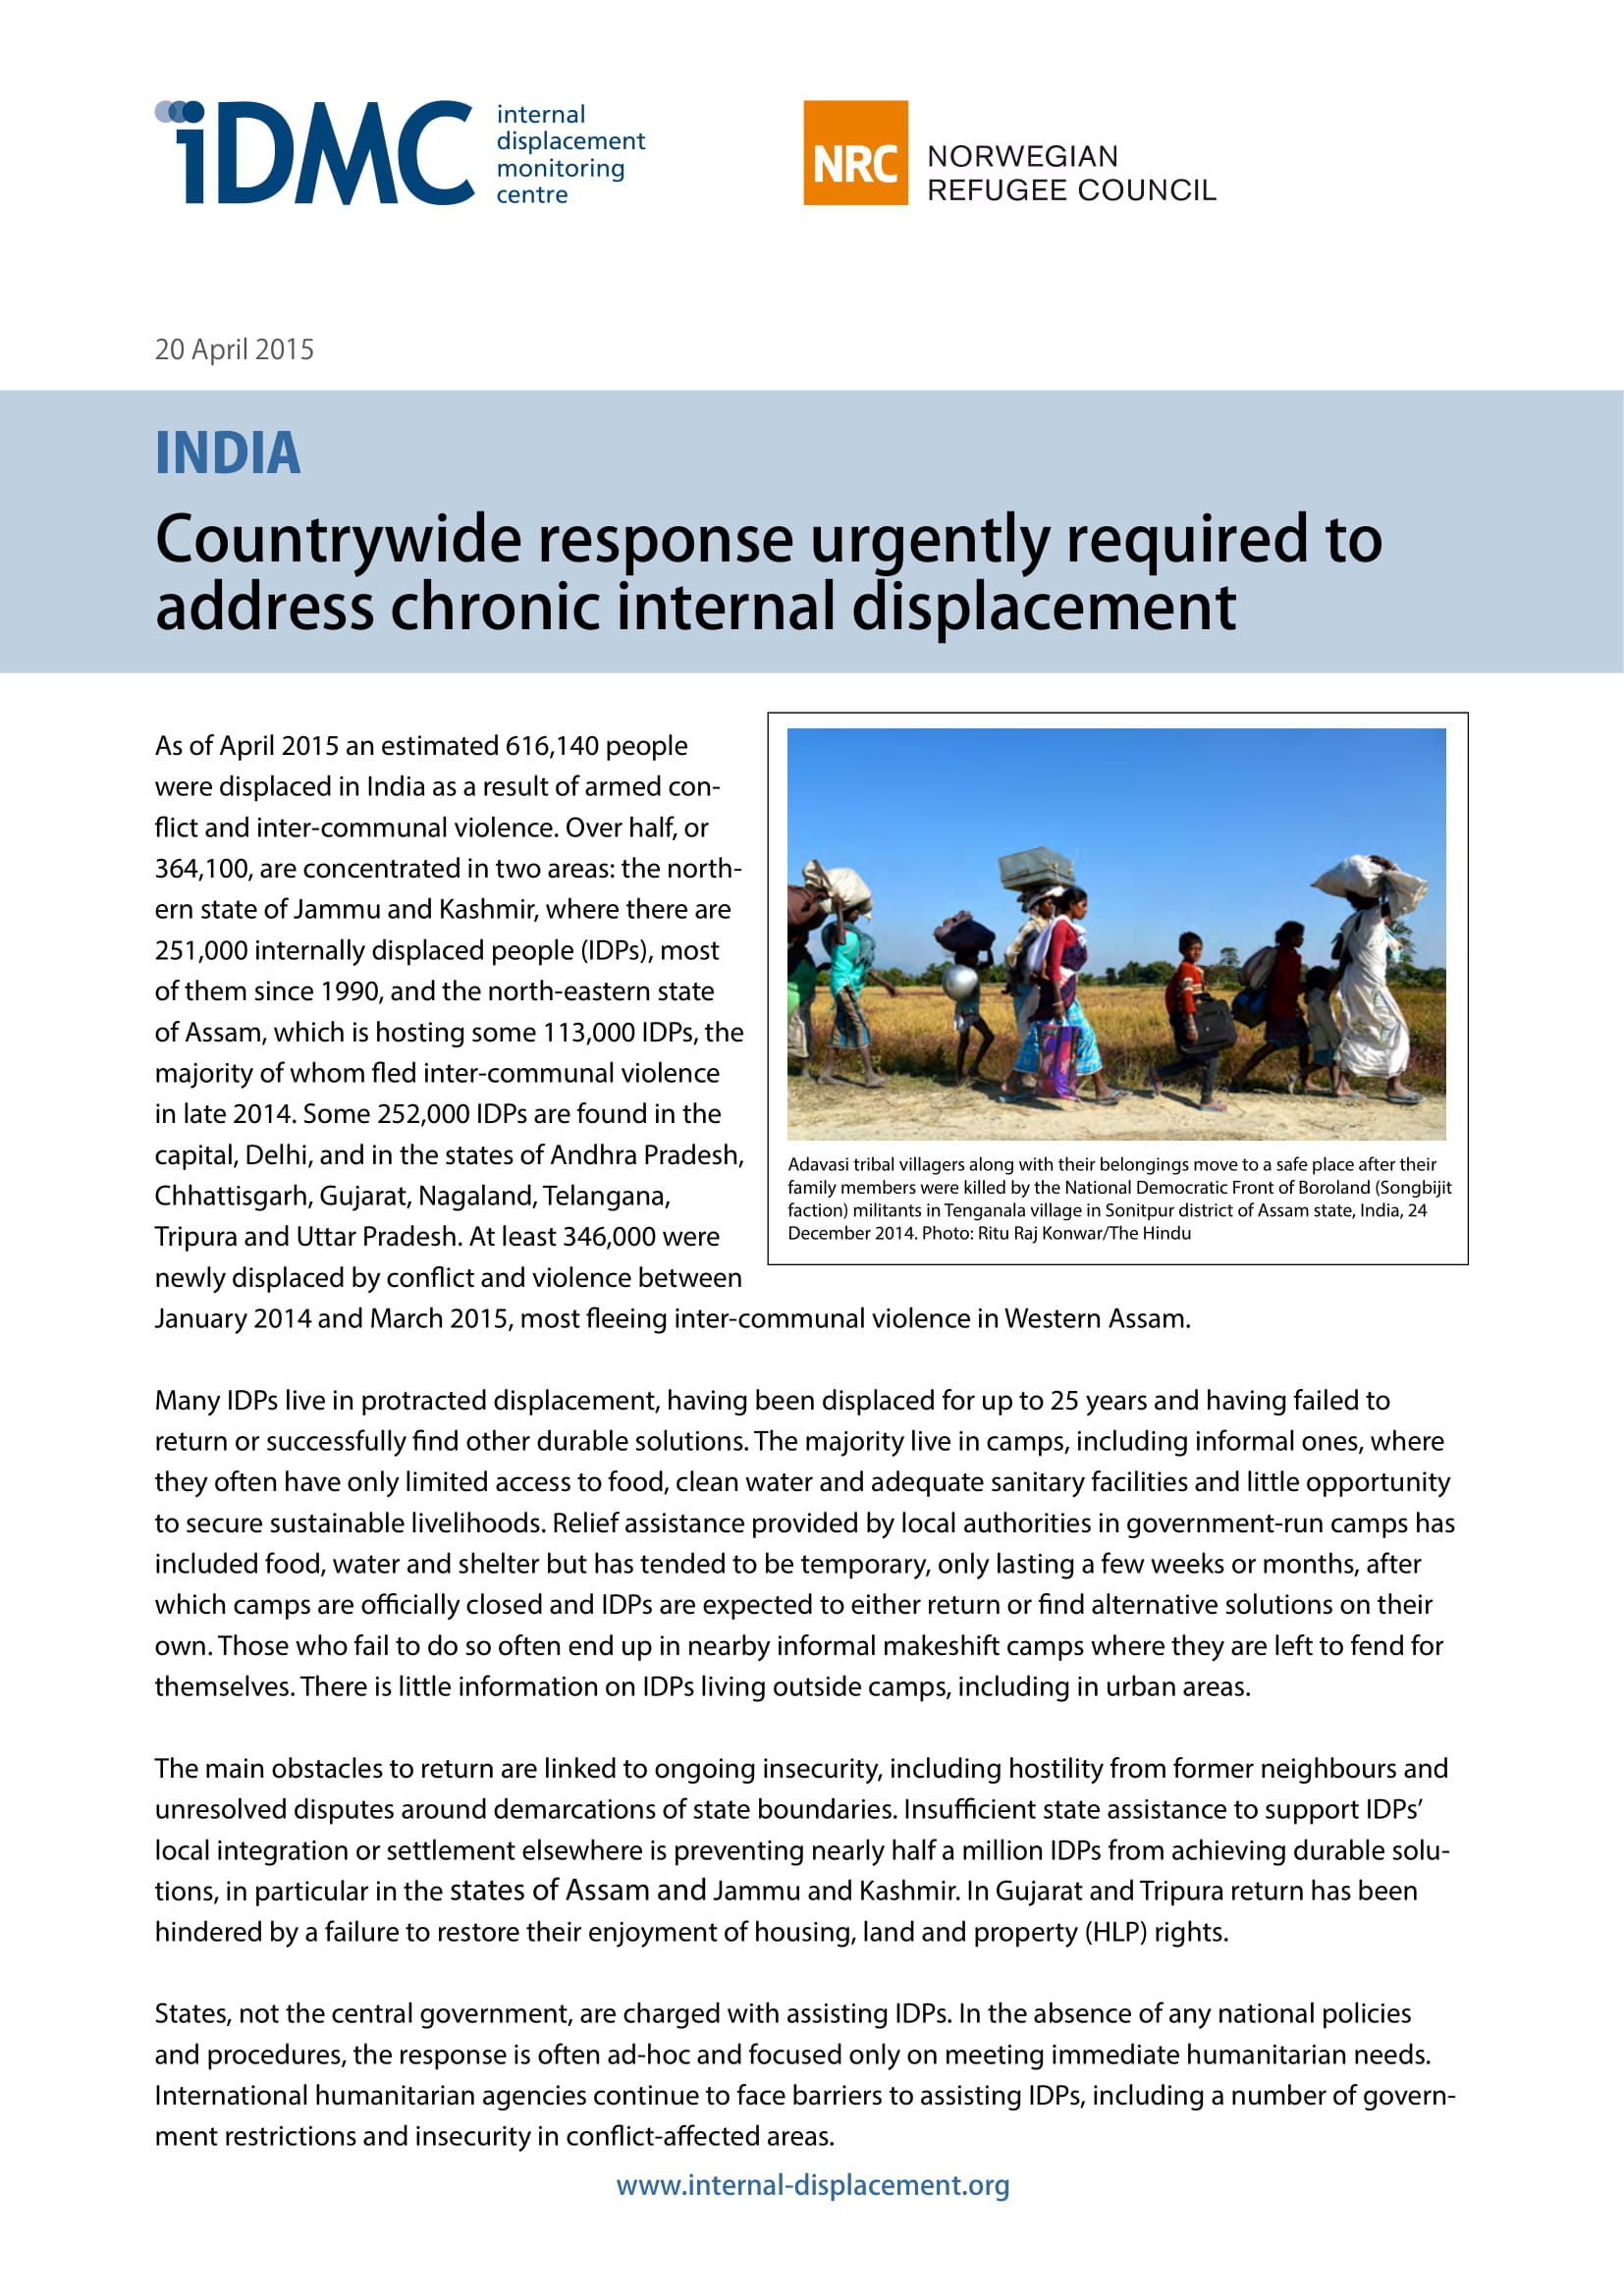 India: Countrywide response urgently required to address chronic internal displacement